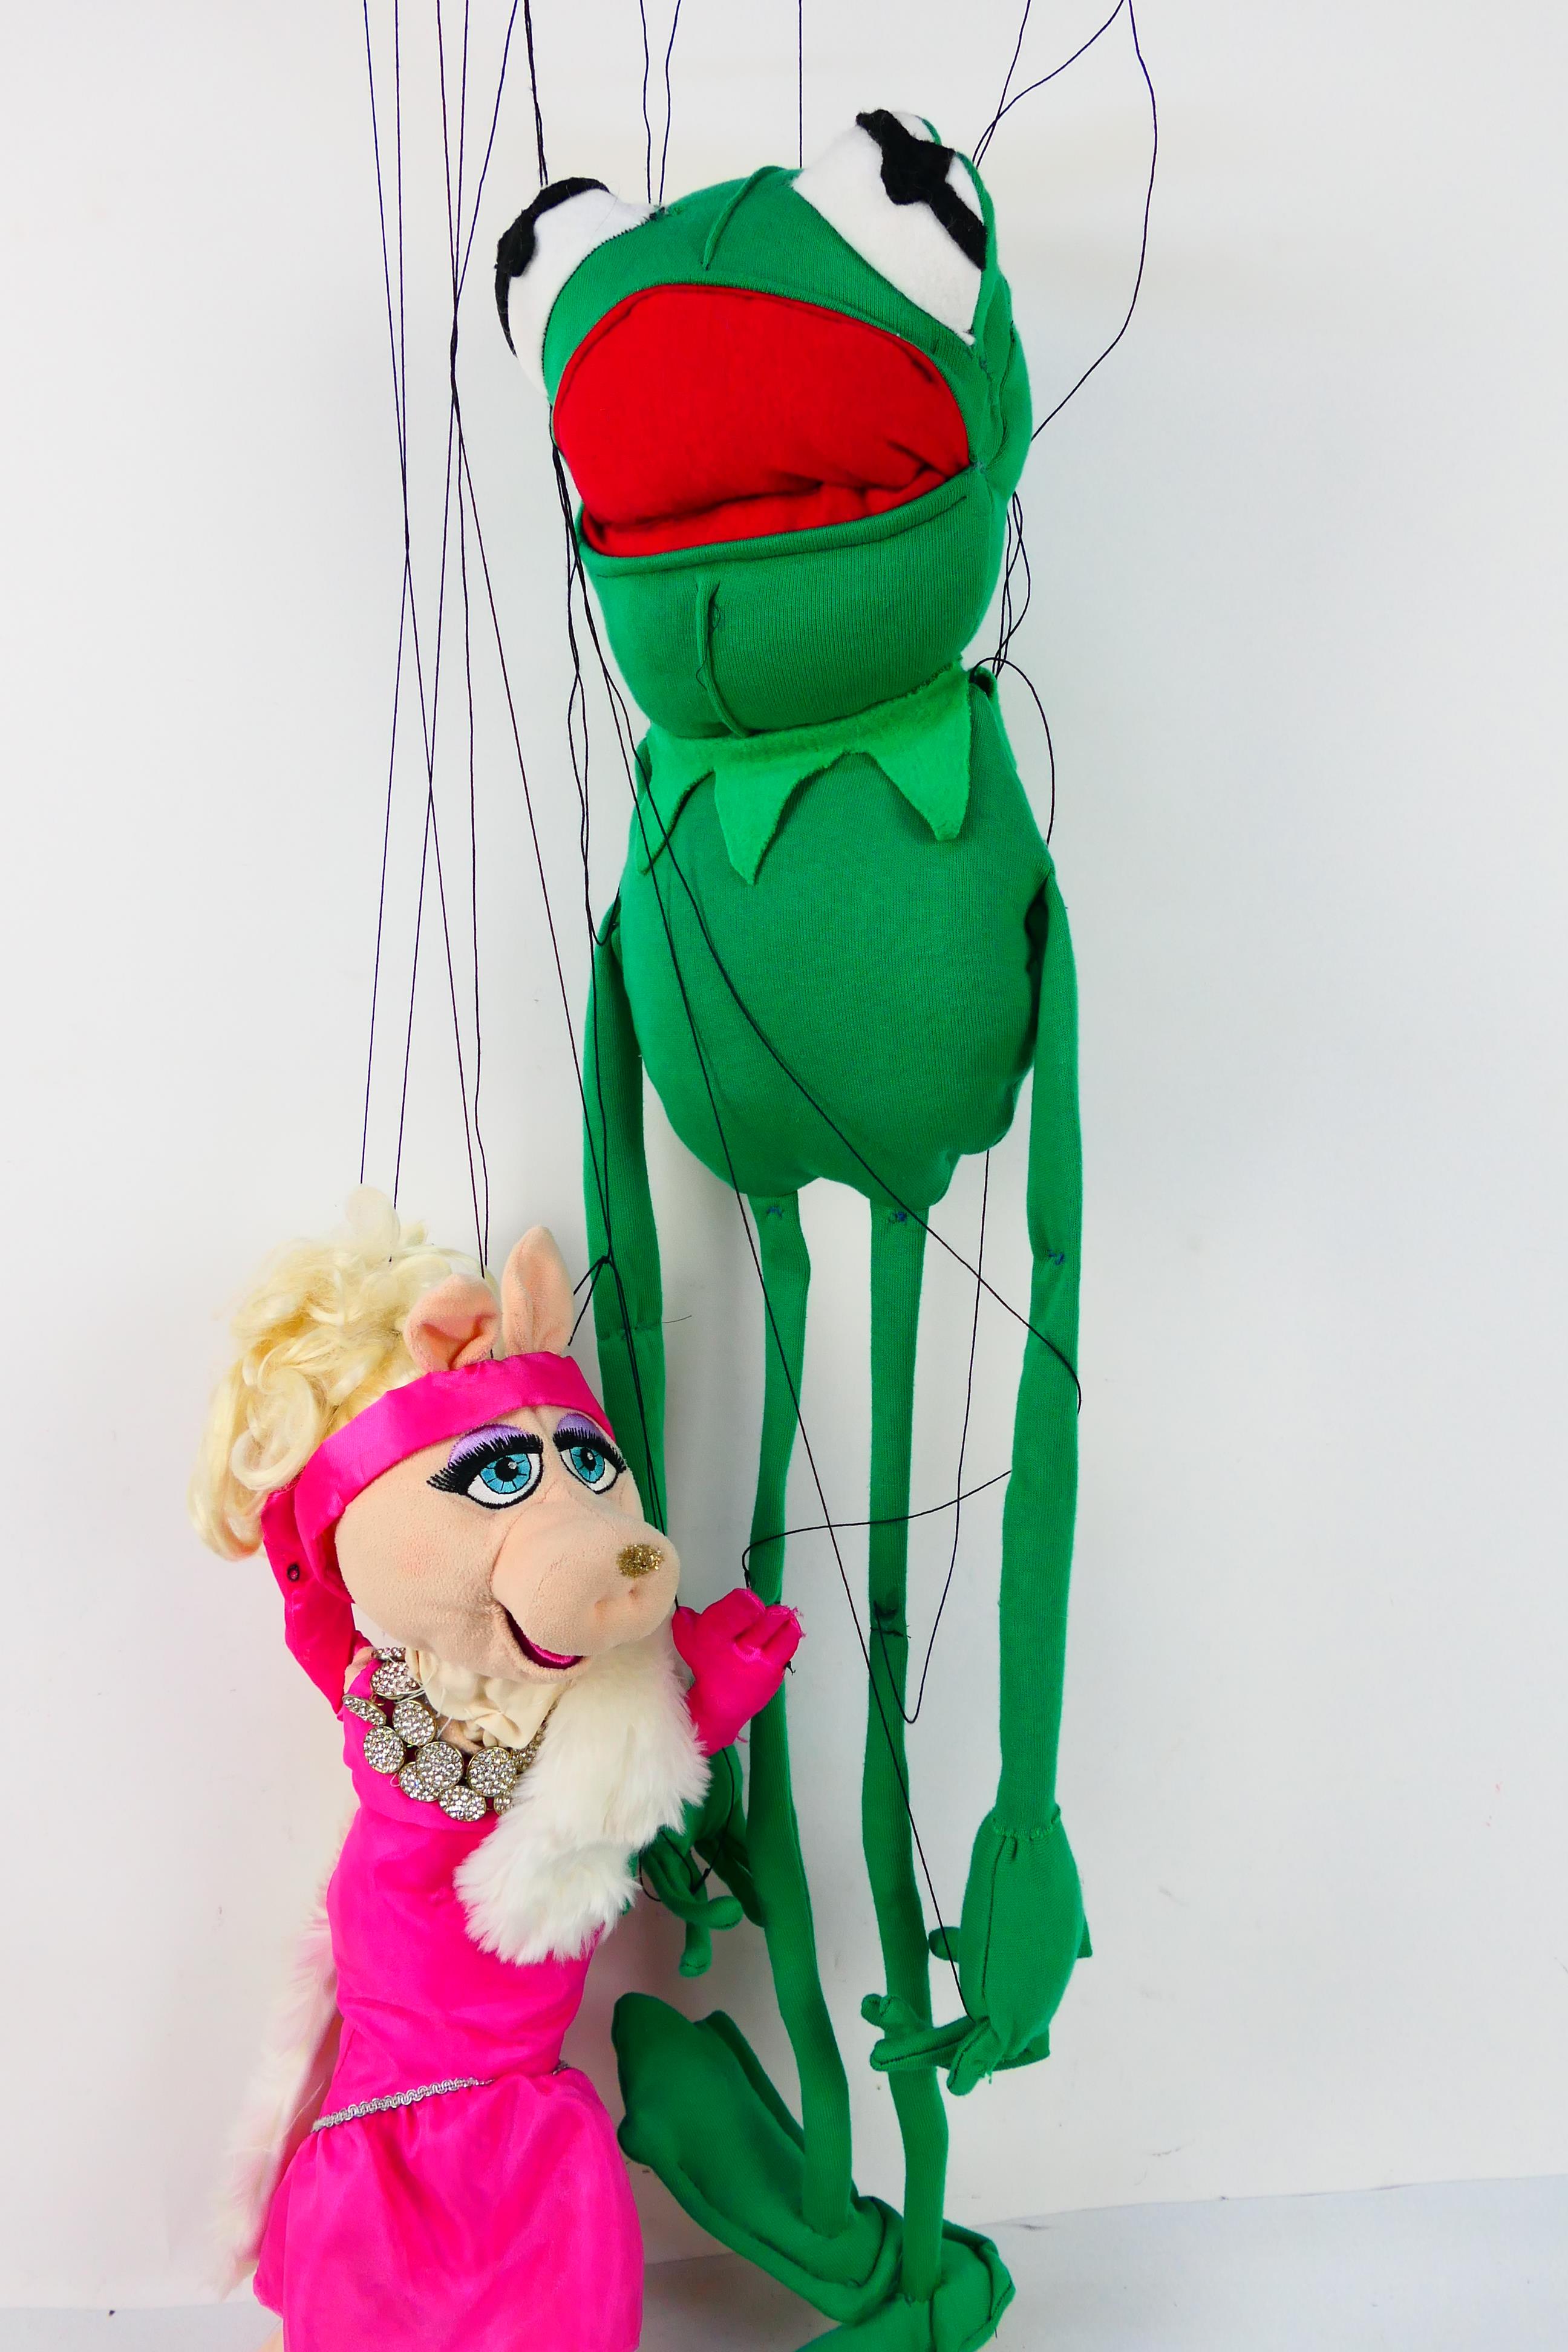 Marionettes - Kermit the Frog - Miss Piggy. - Image 4 of 7